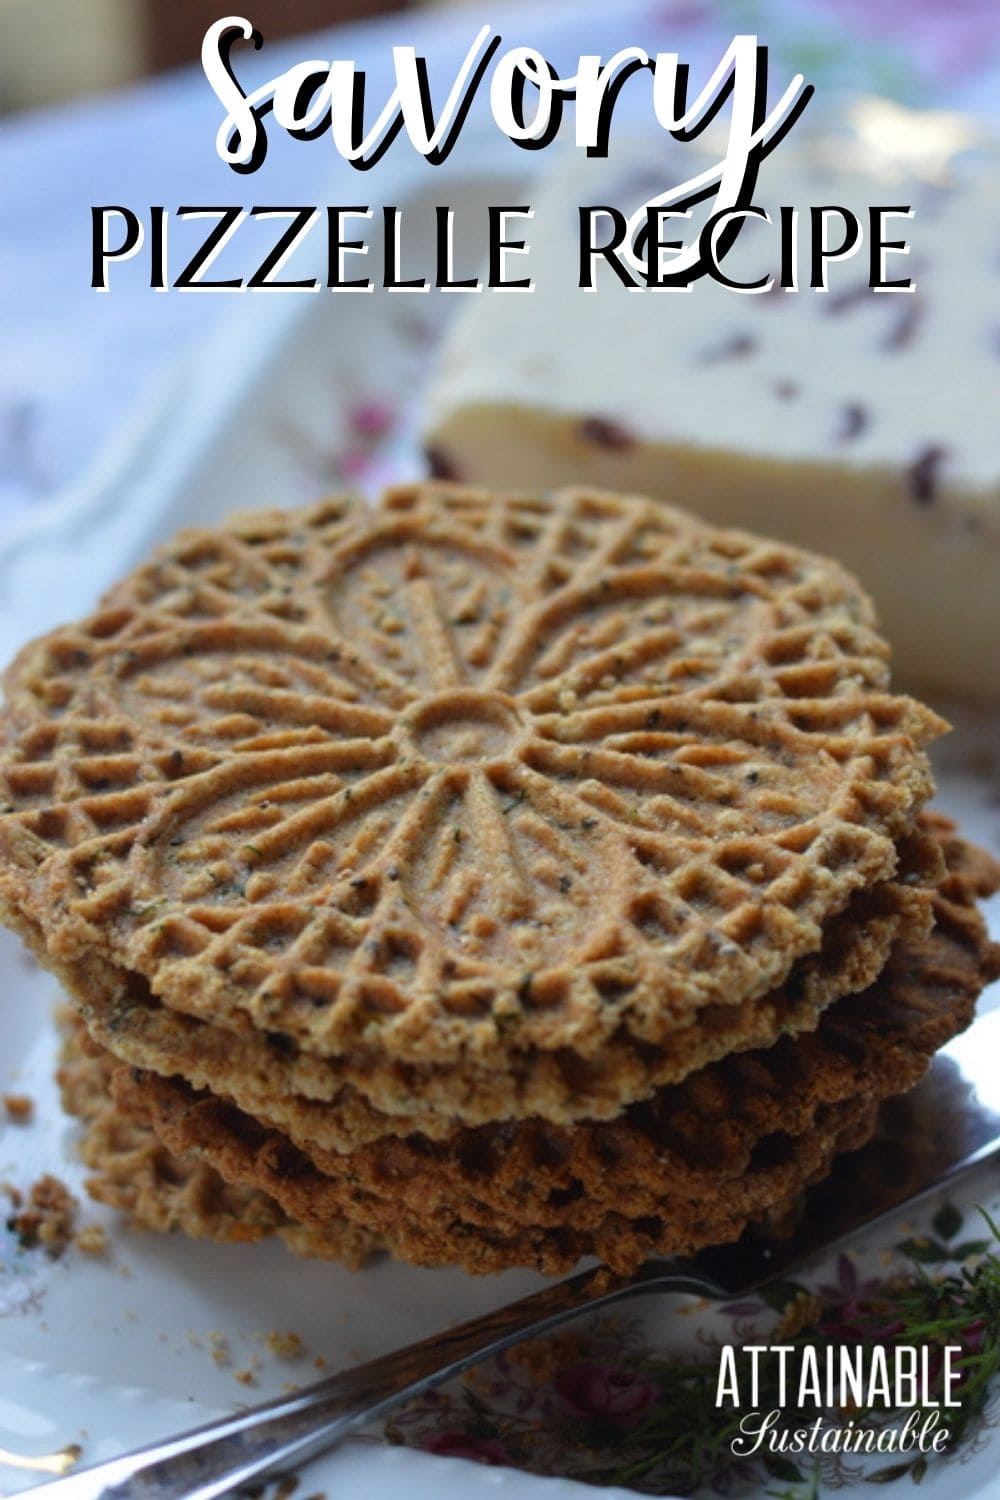 pizzelle recipe made and plated on a floral plate.